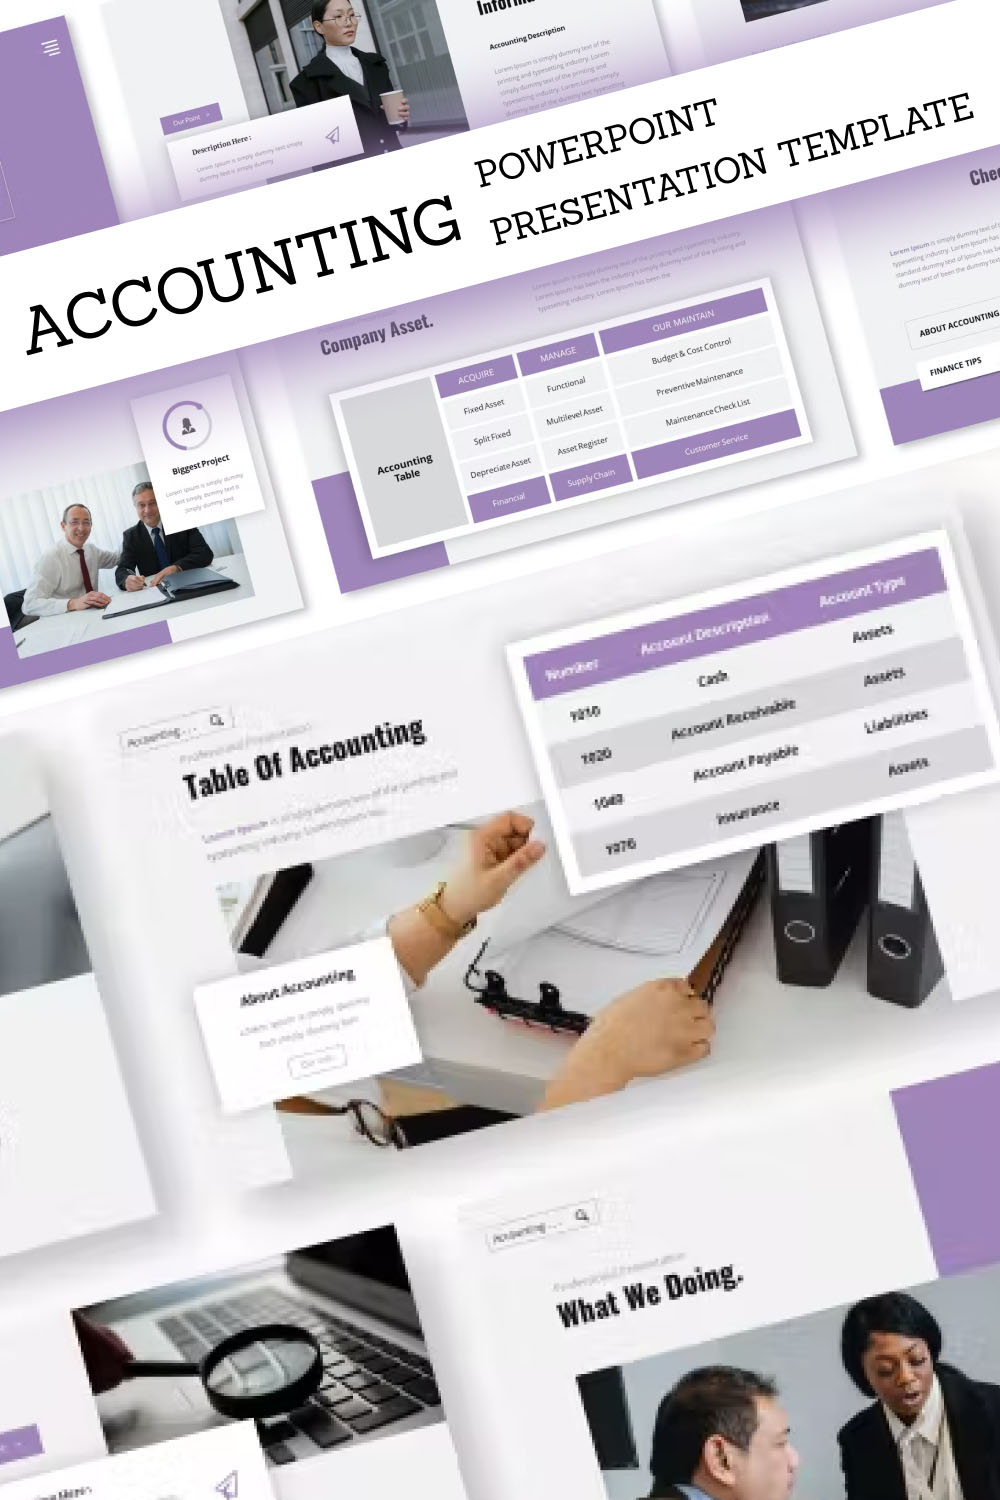 Accounting powerpoint presentation template of pinterest.